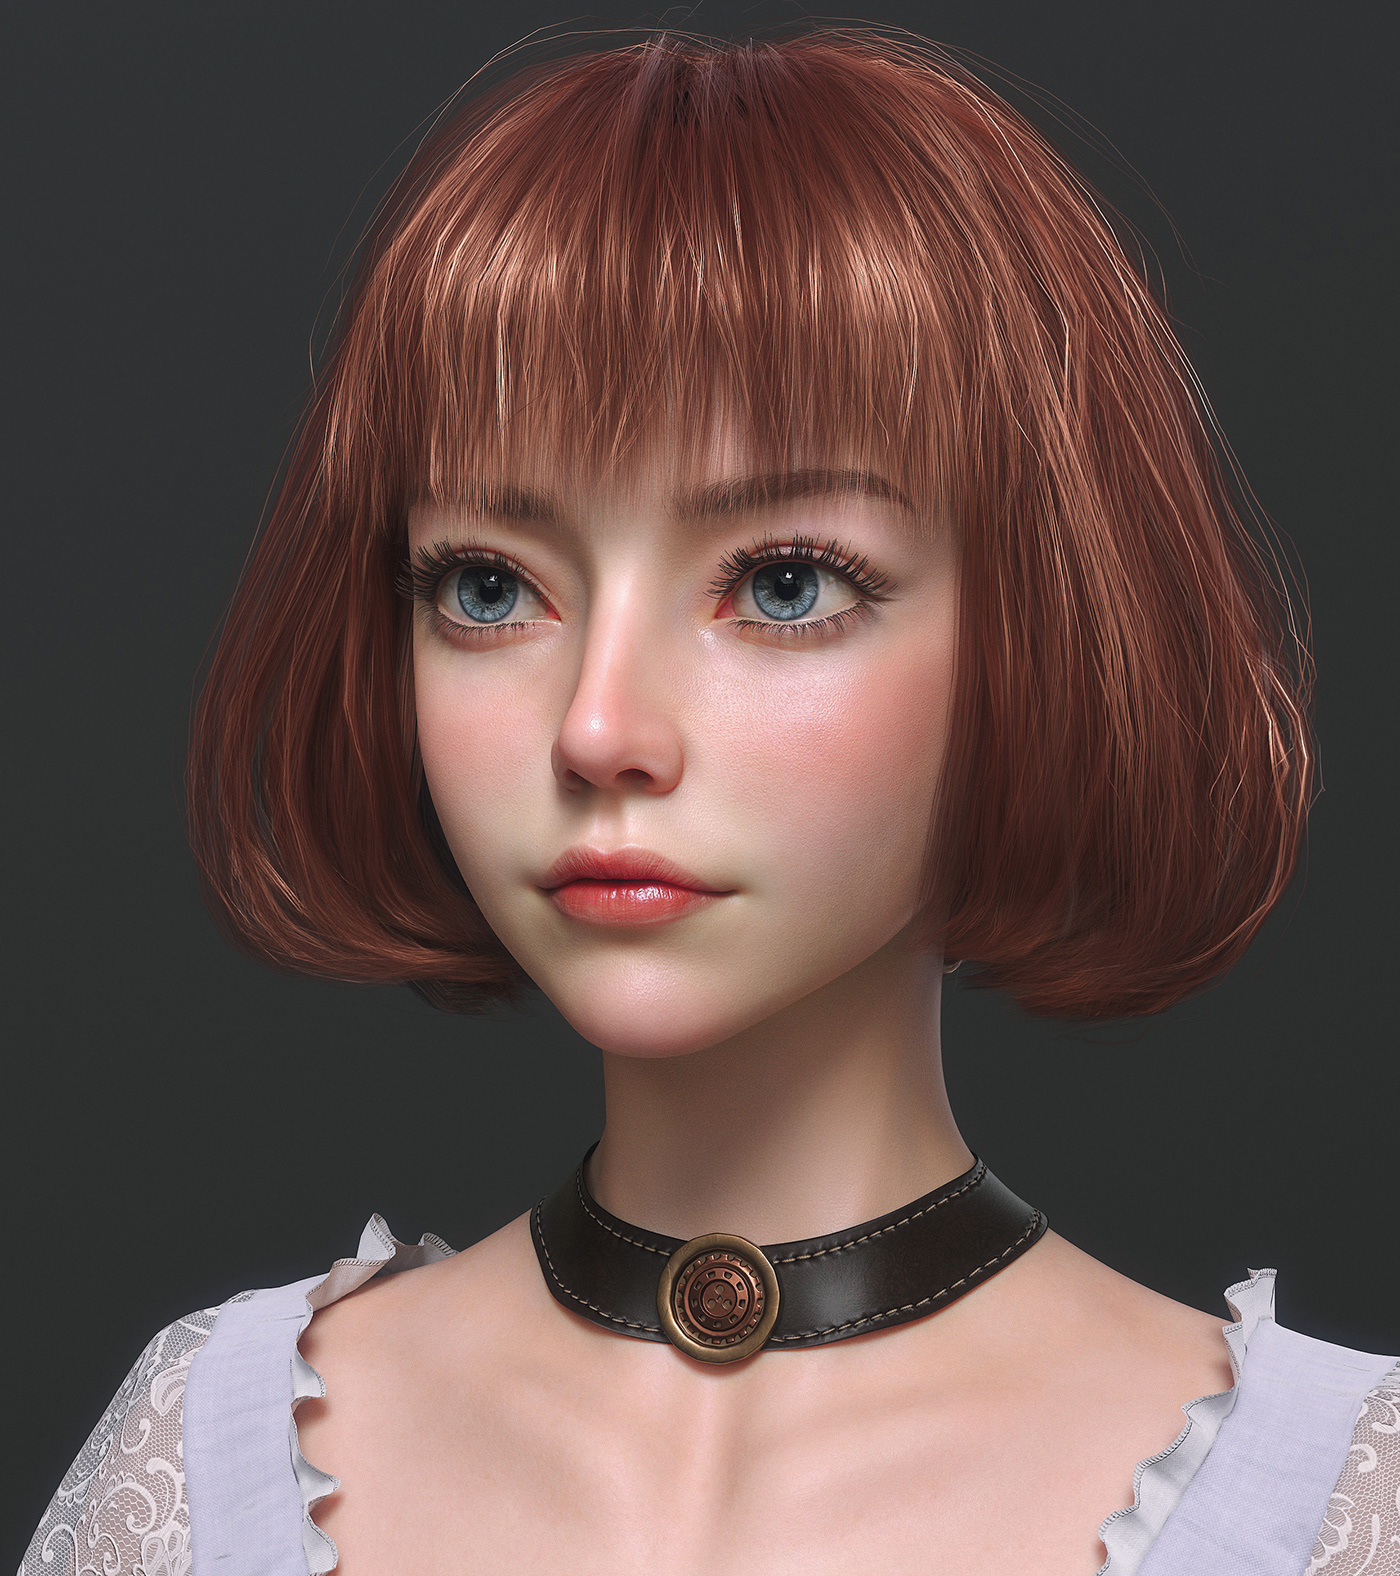 3D 3D Character 3d modeling character modeling lighting texturing real time rendering realistic style